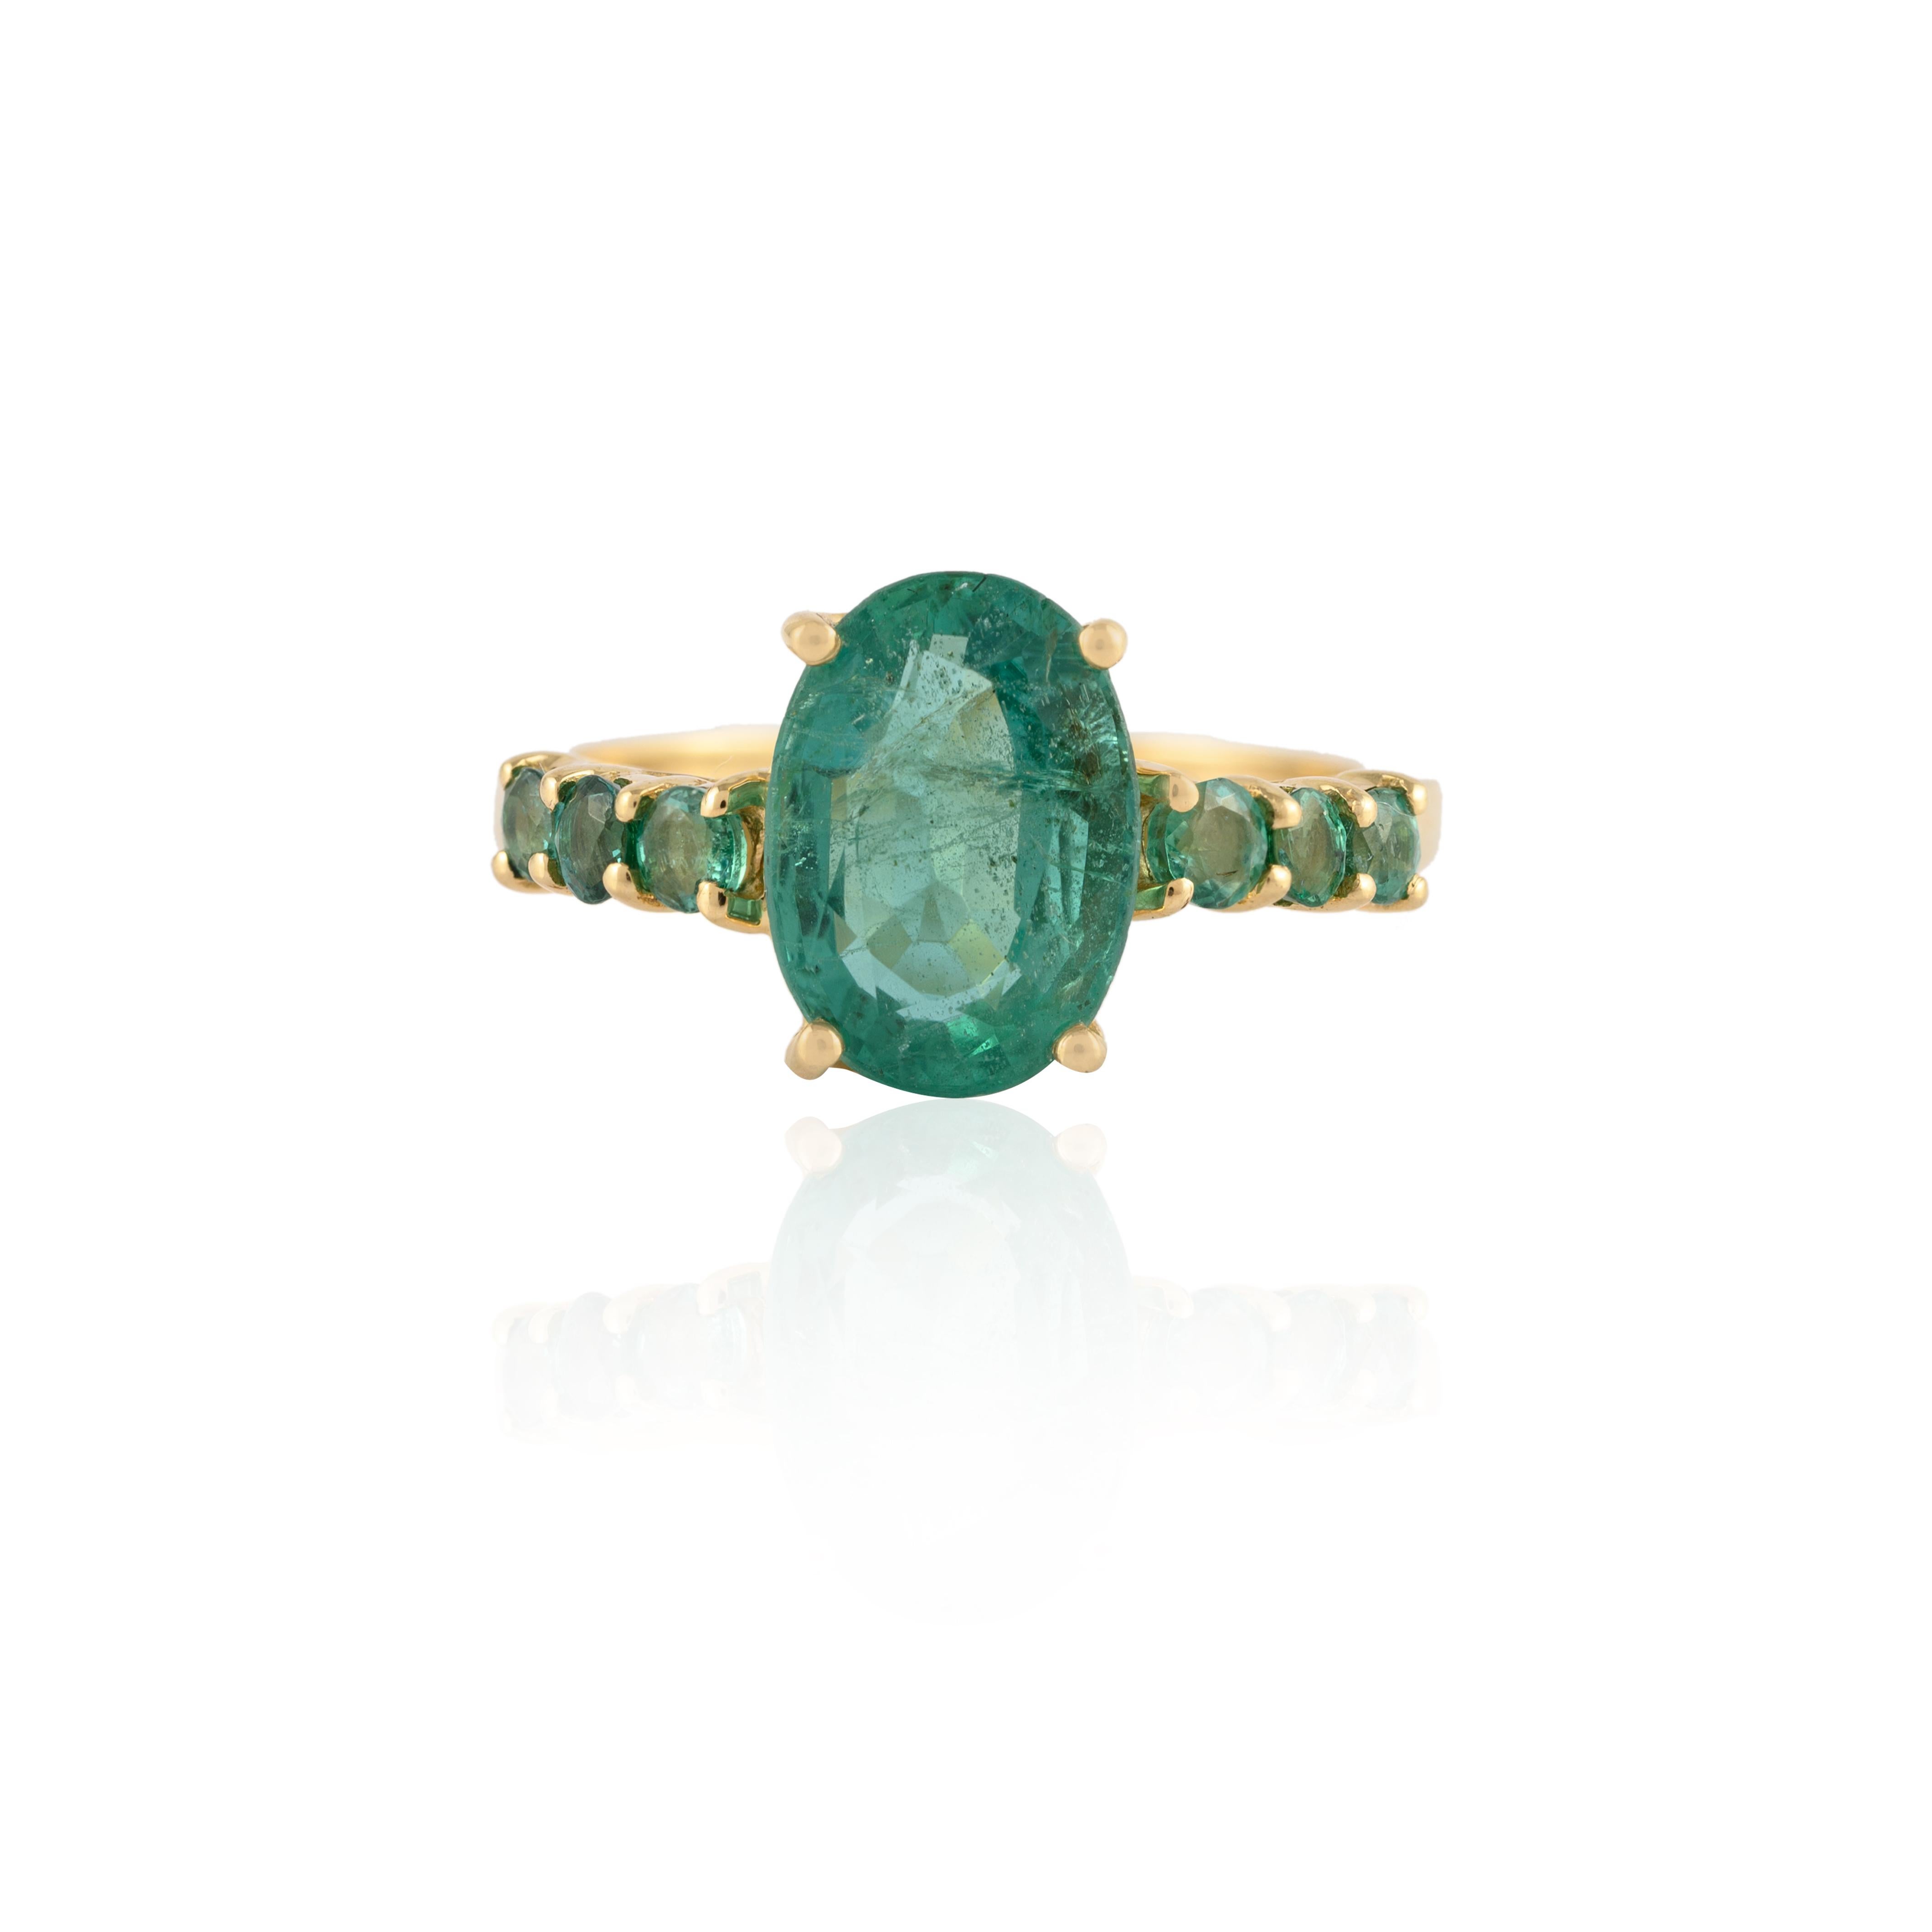 For Sale:  3.09 Carat Genuine Emerald Ring Handcrafted in 14k Solid Yellow Gold 2